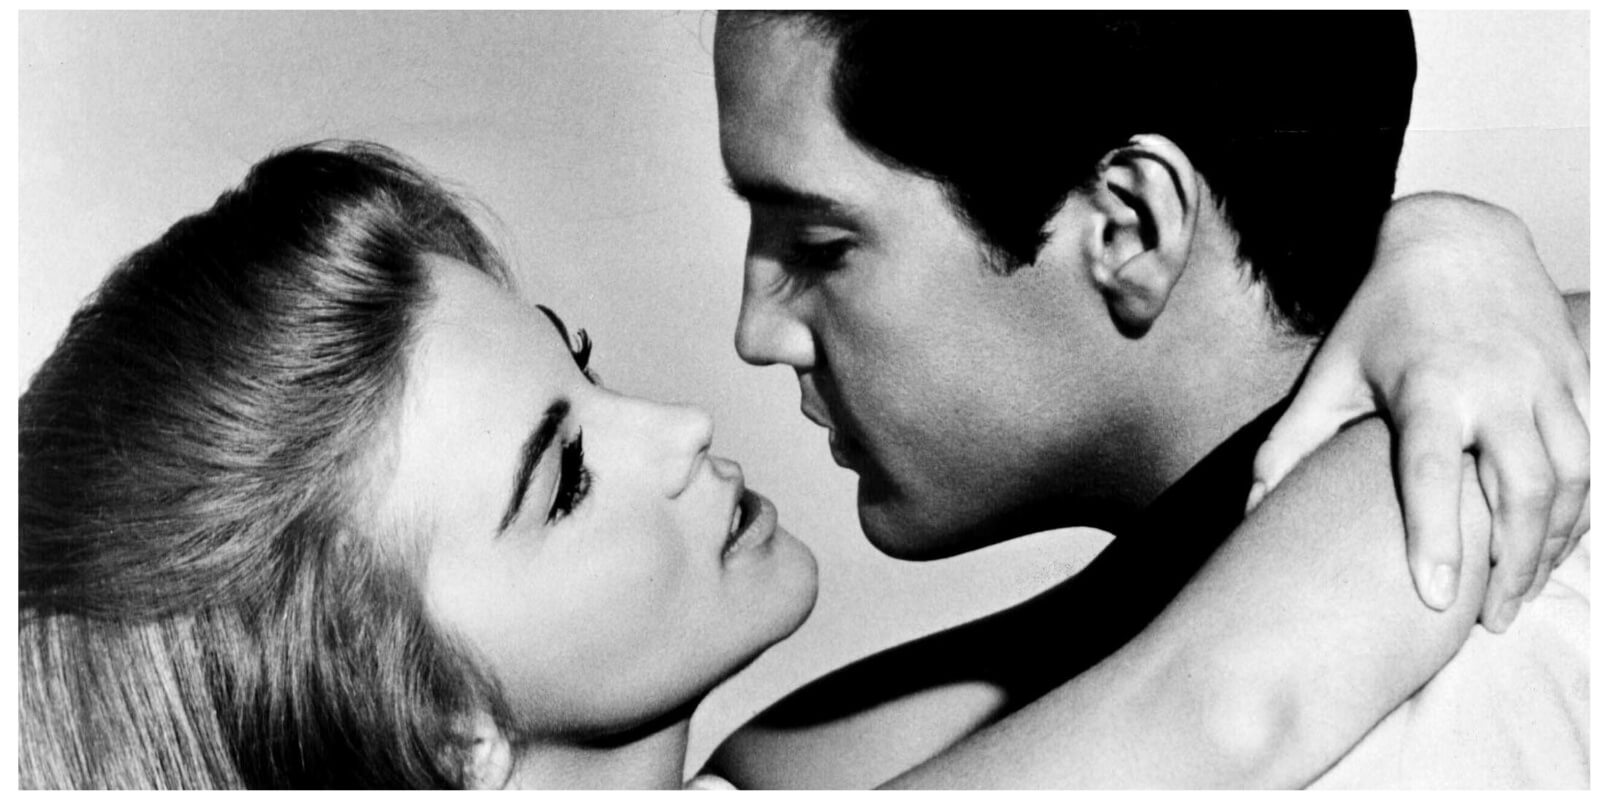 Ann-Margret and Elvis Presley in a publicity photo for the film 'Viva Las Vegas.'